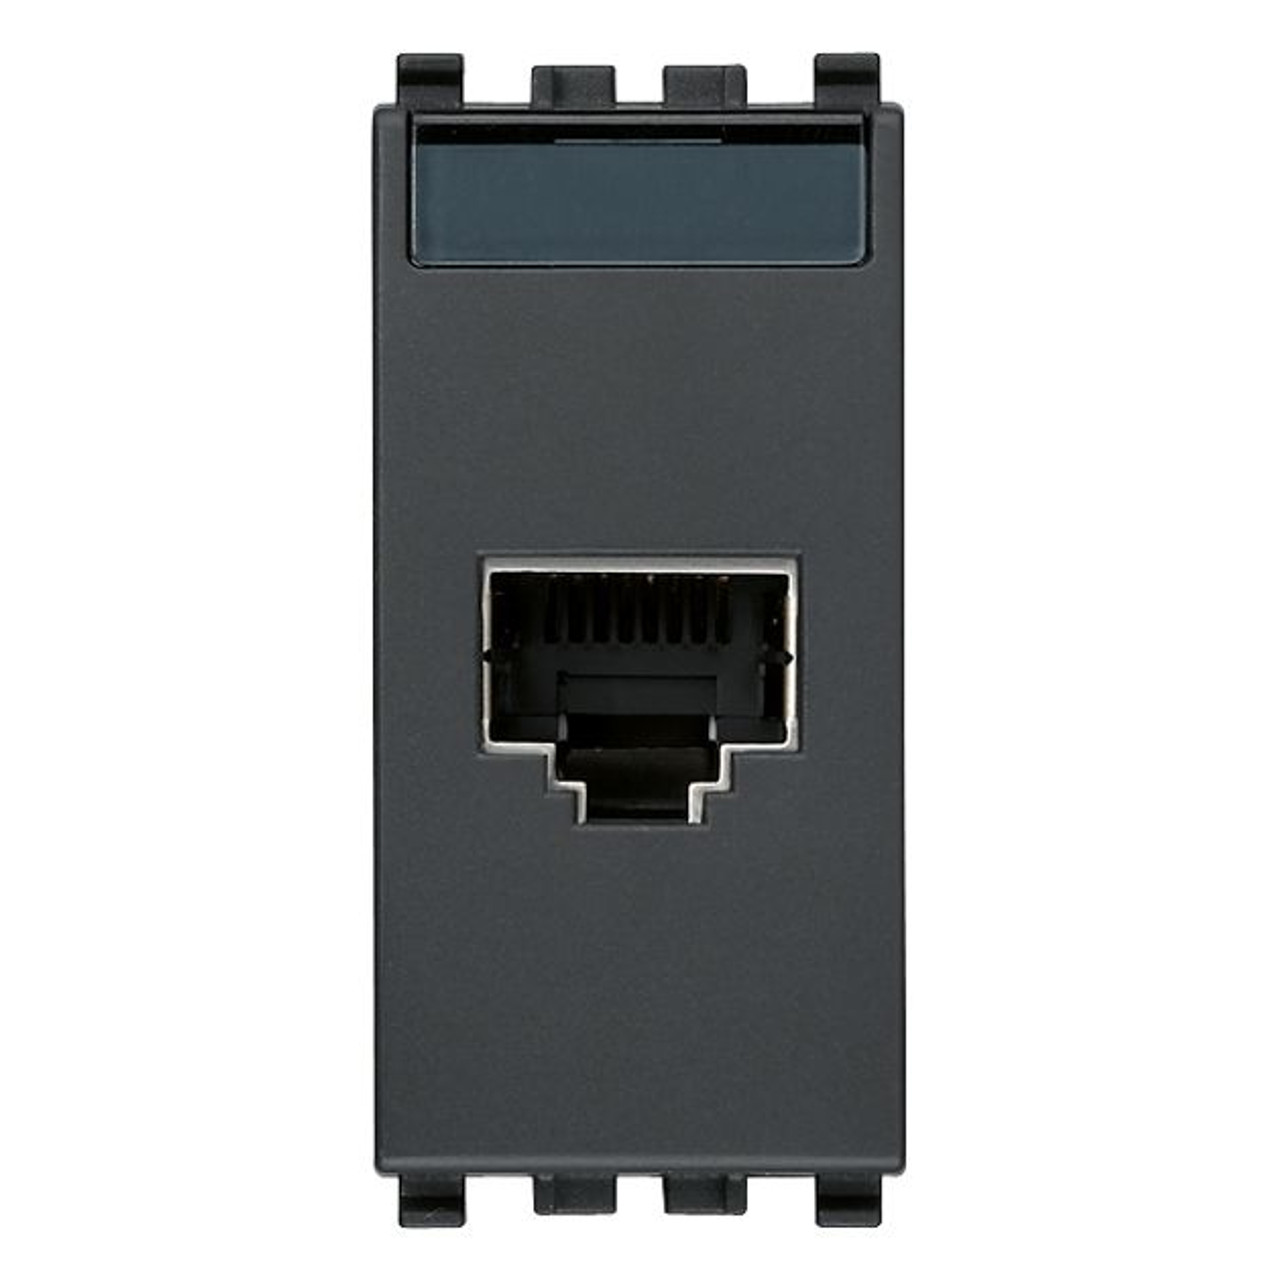 Vimar - Net Safe 20339.6 UTP110 Socket Outlet - RJ45 Cat6e Connector, Unshielded, T568A/B Universal Wiring, 8 Contacts - Apollo Lighting